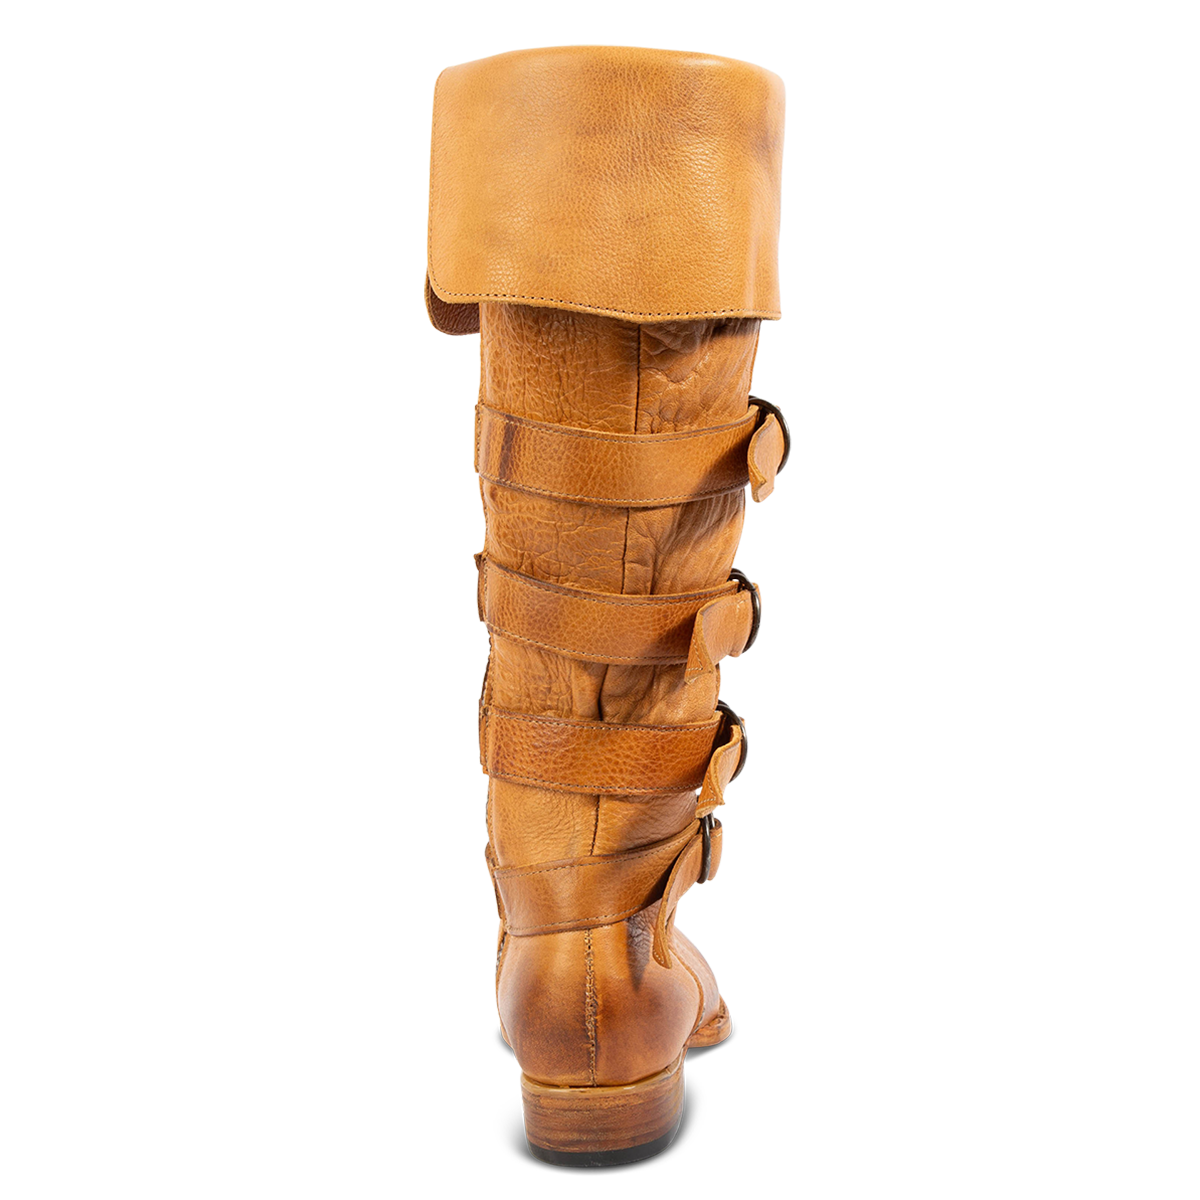 Back view showing low heel on FREEBIRD women's Risky wheat fold-over leather boot